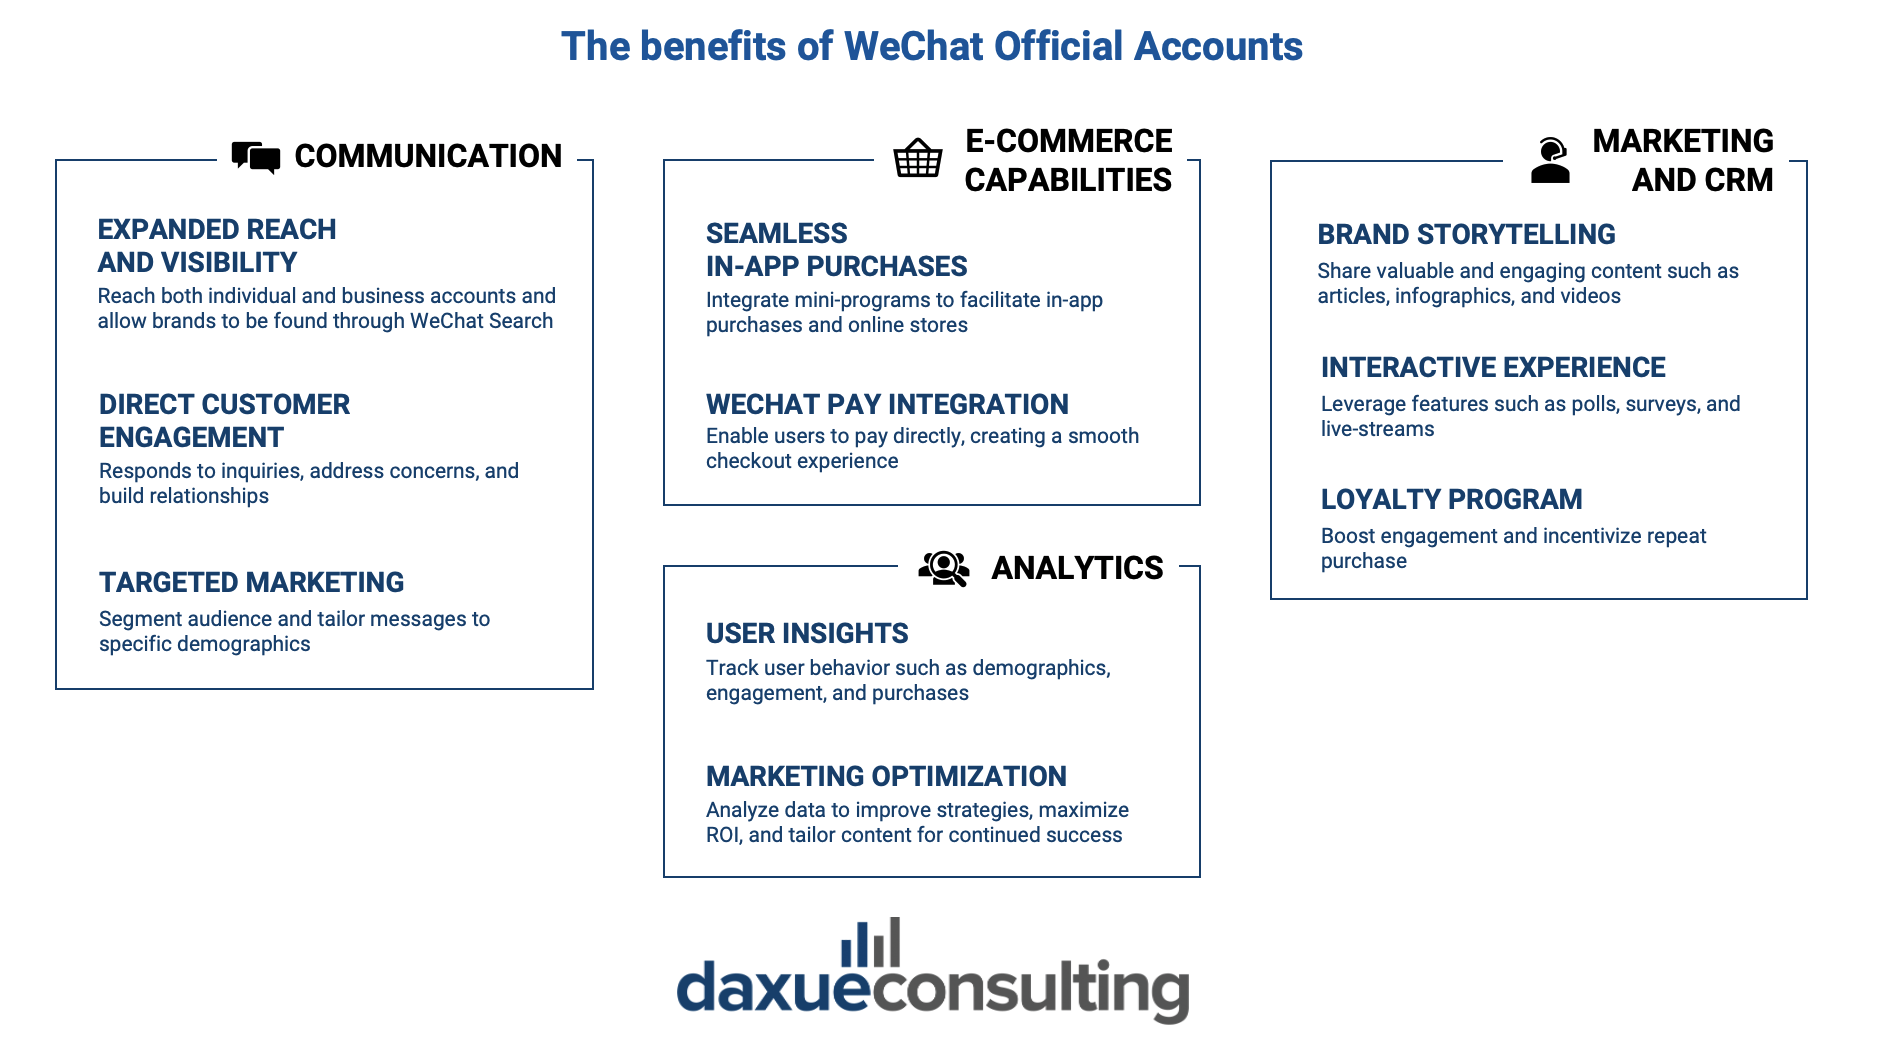 Daxue: Benefits of having a WeChat Official Account